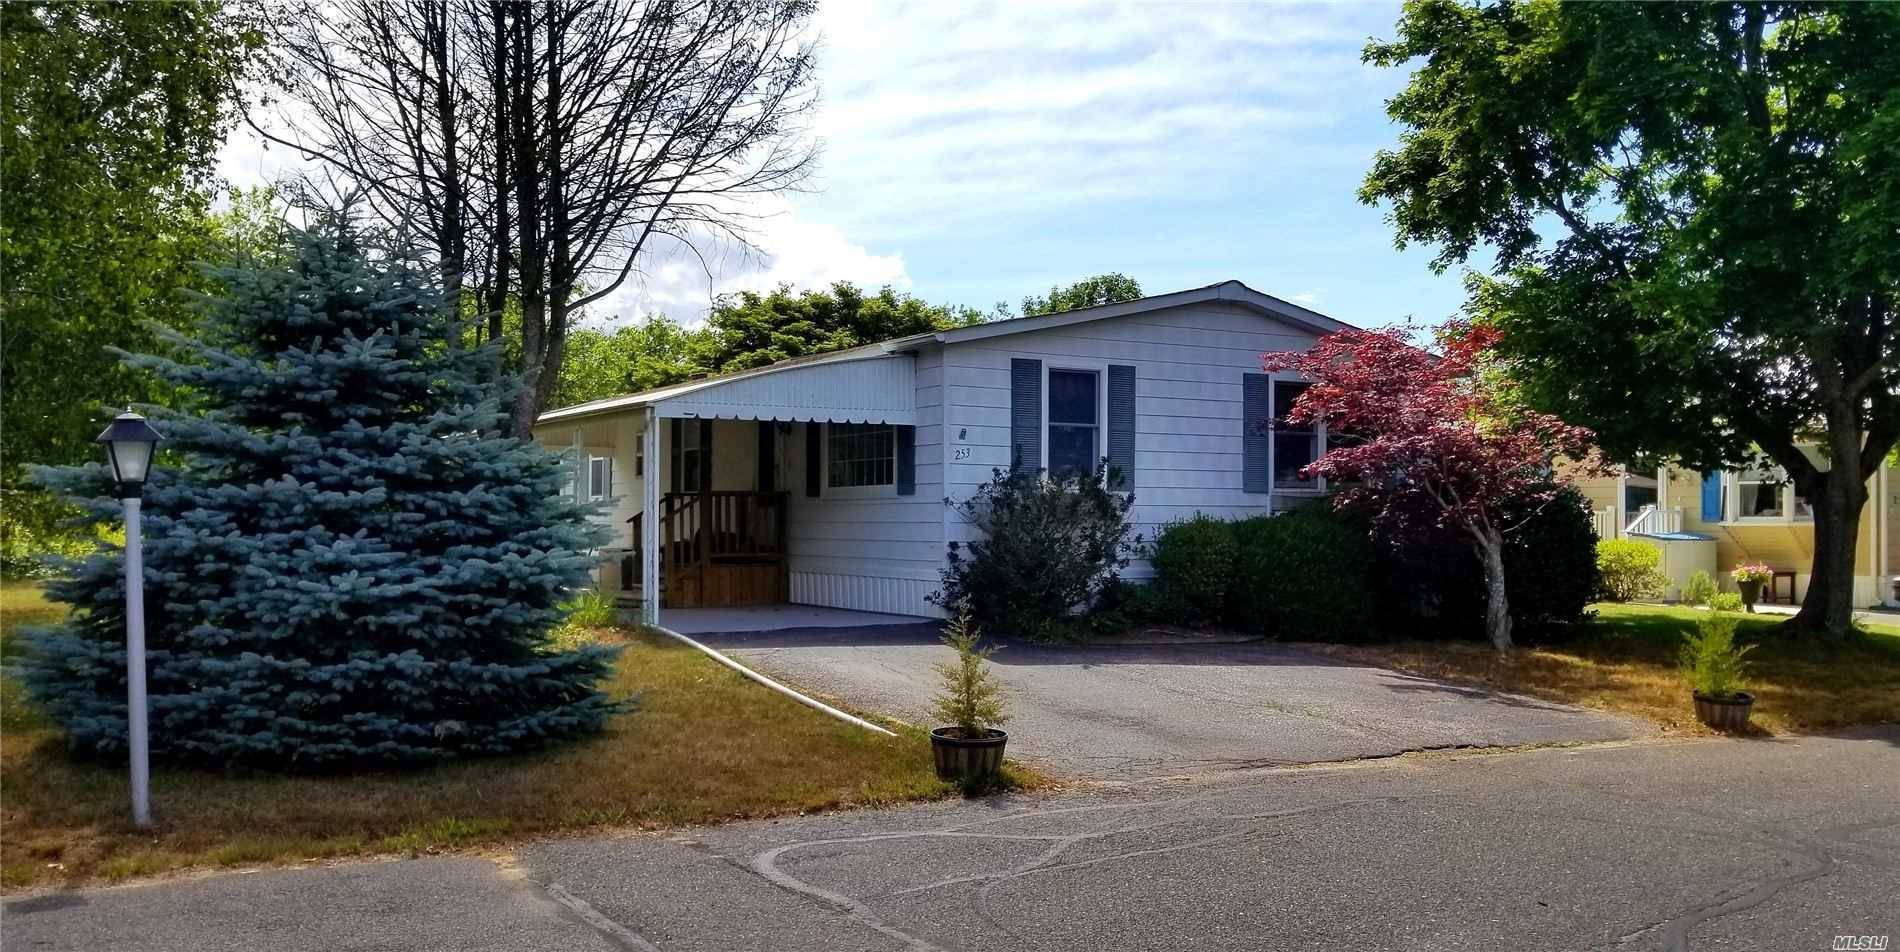 Great Mobile Home. Newer Kitchen, New Bth, Roof 4 years old, Heat 3 years old, Master w 1 2 bth, Living Rm, Dining Rm, Bed Rm, Full bth This home ...